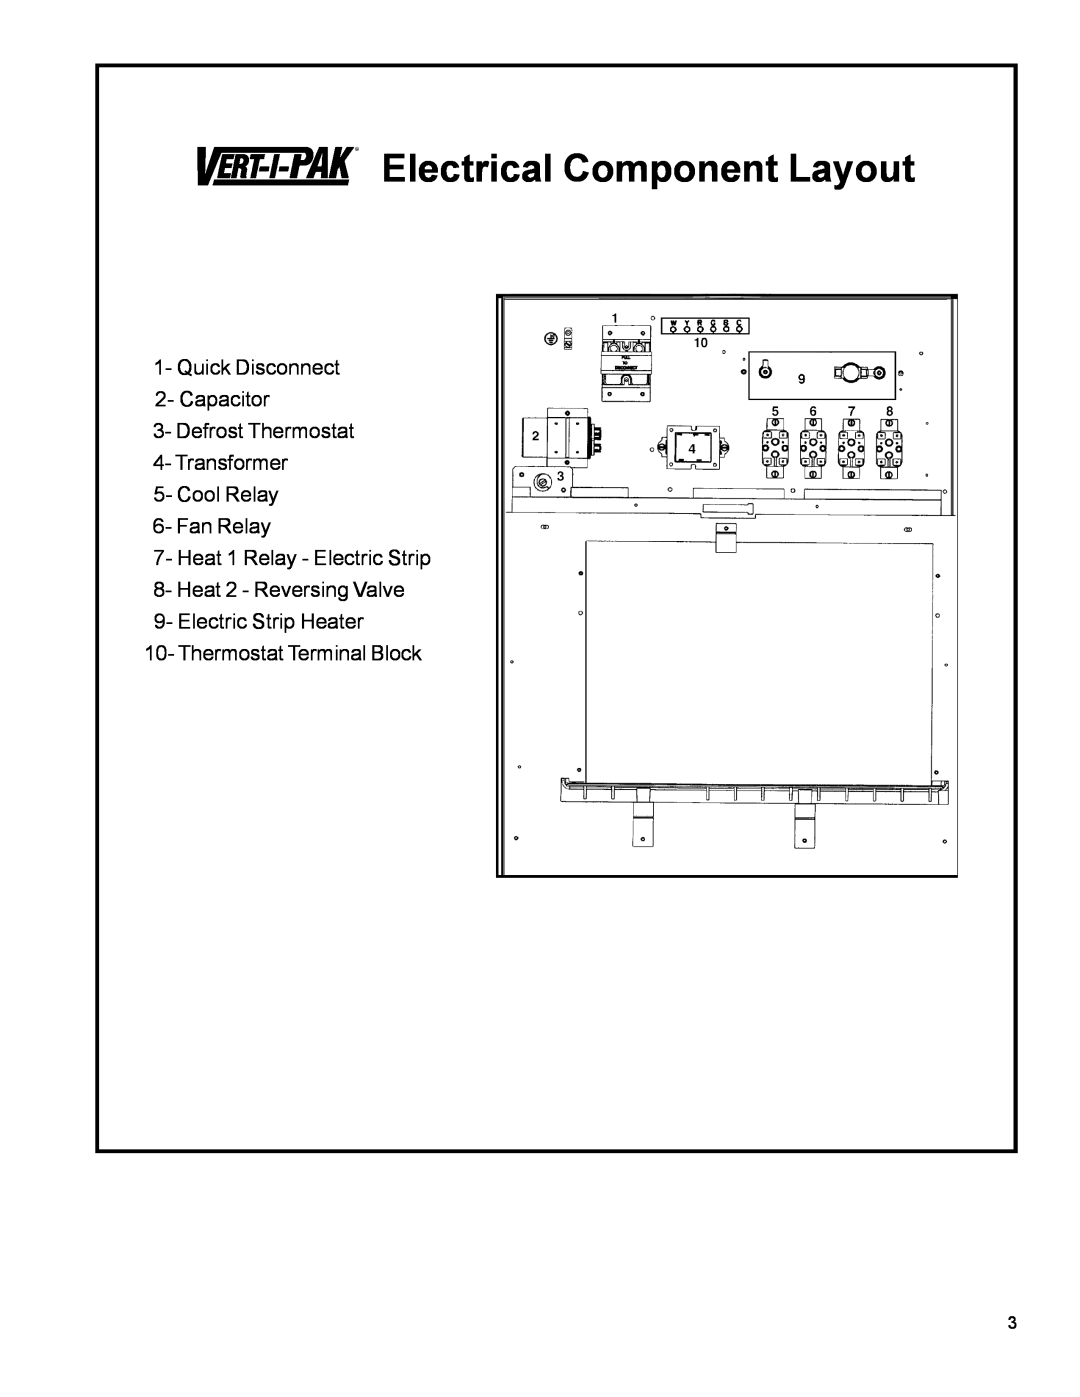 Friedrich H)A09K25**G manual Electrical Component Layout, Quick Disconnect 2- Capacitor, Defrost Thermostat 4- Transformer 